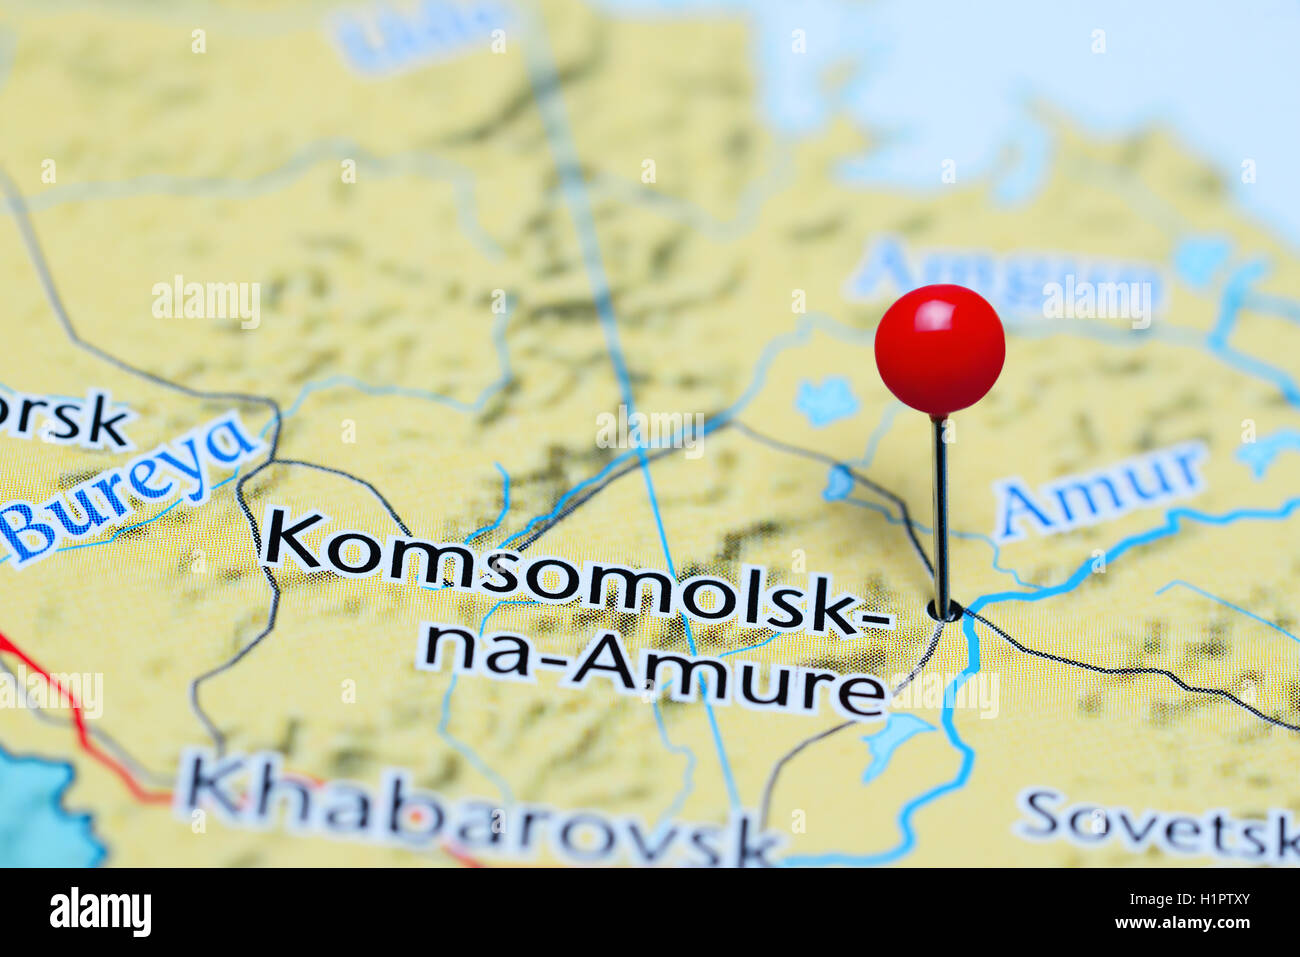 Komsomolsk-na-Amure pinned on a map of Russia Stock Photo